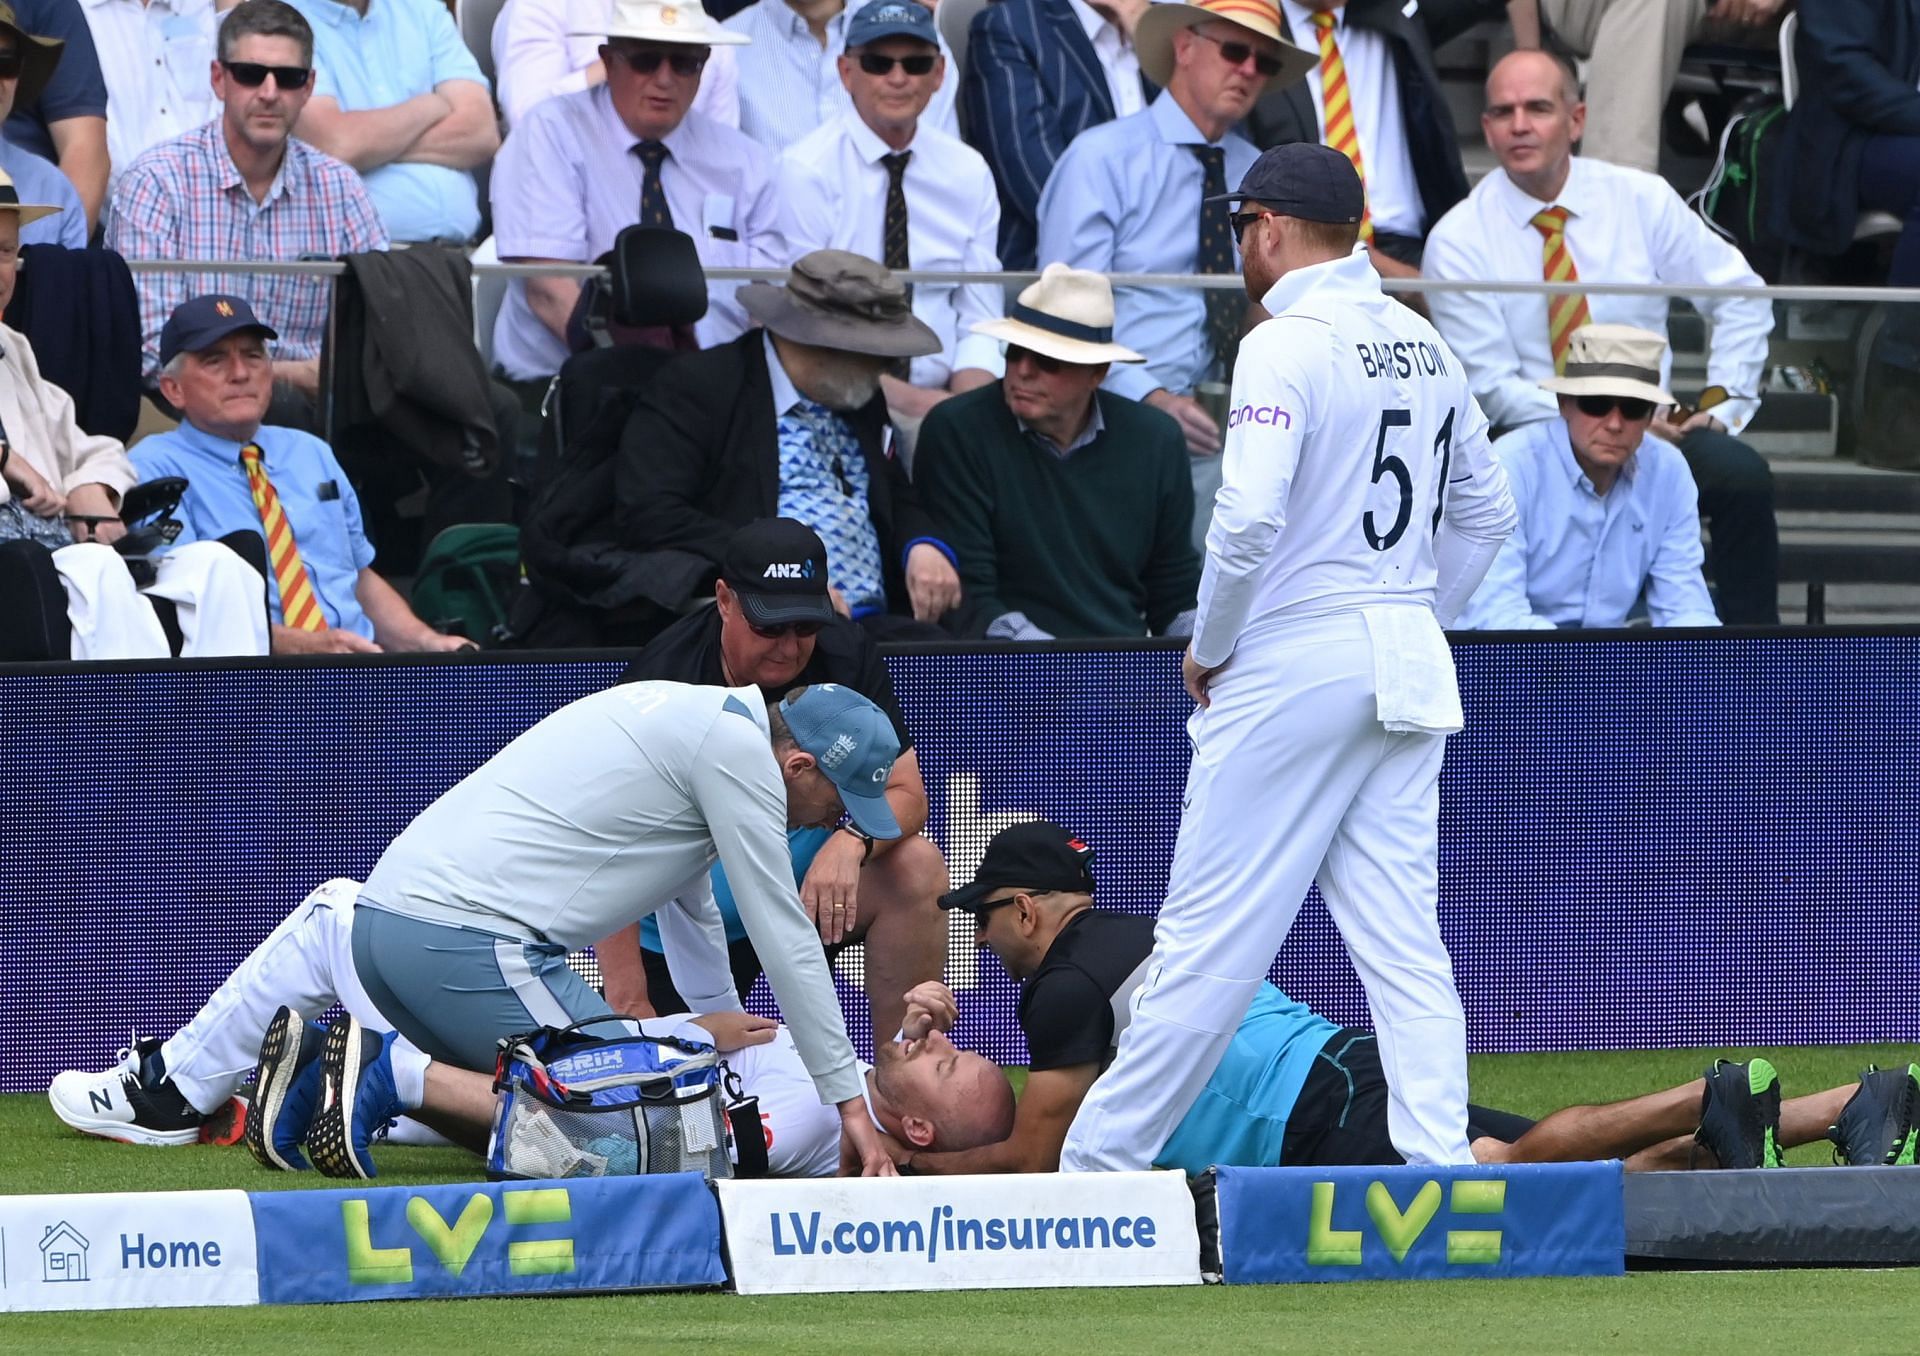 England v New Zealand - First LV= Insurance Test Match: Day One